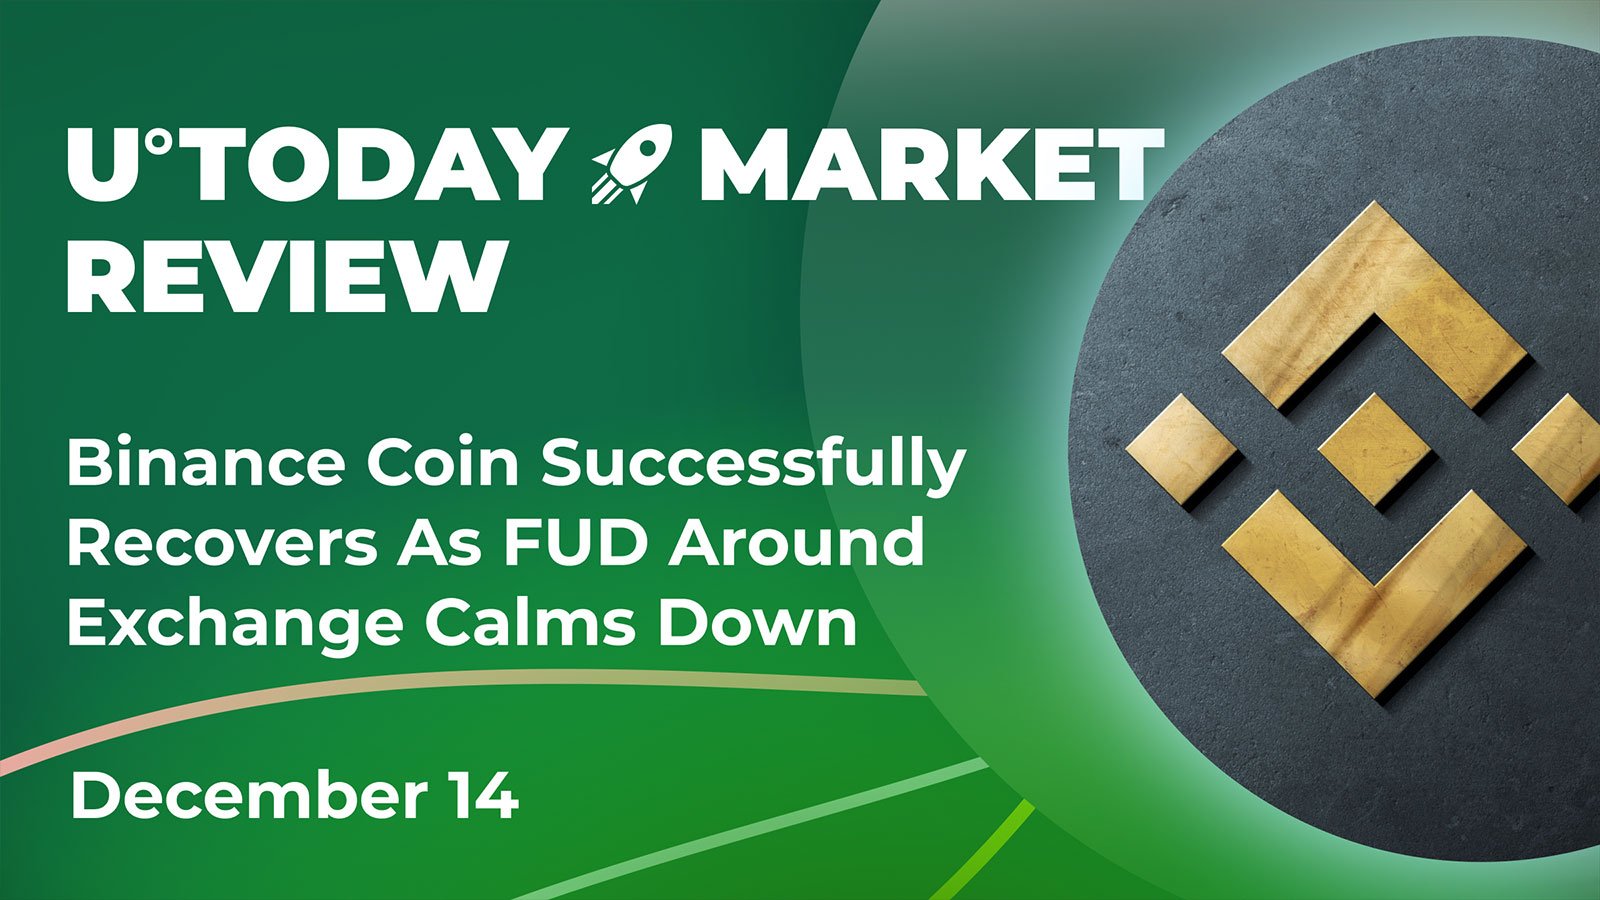 Binance Coin Successfully Recovers as FUD Around Exchange Calms Down: Crypto Market Review, Dec. 14